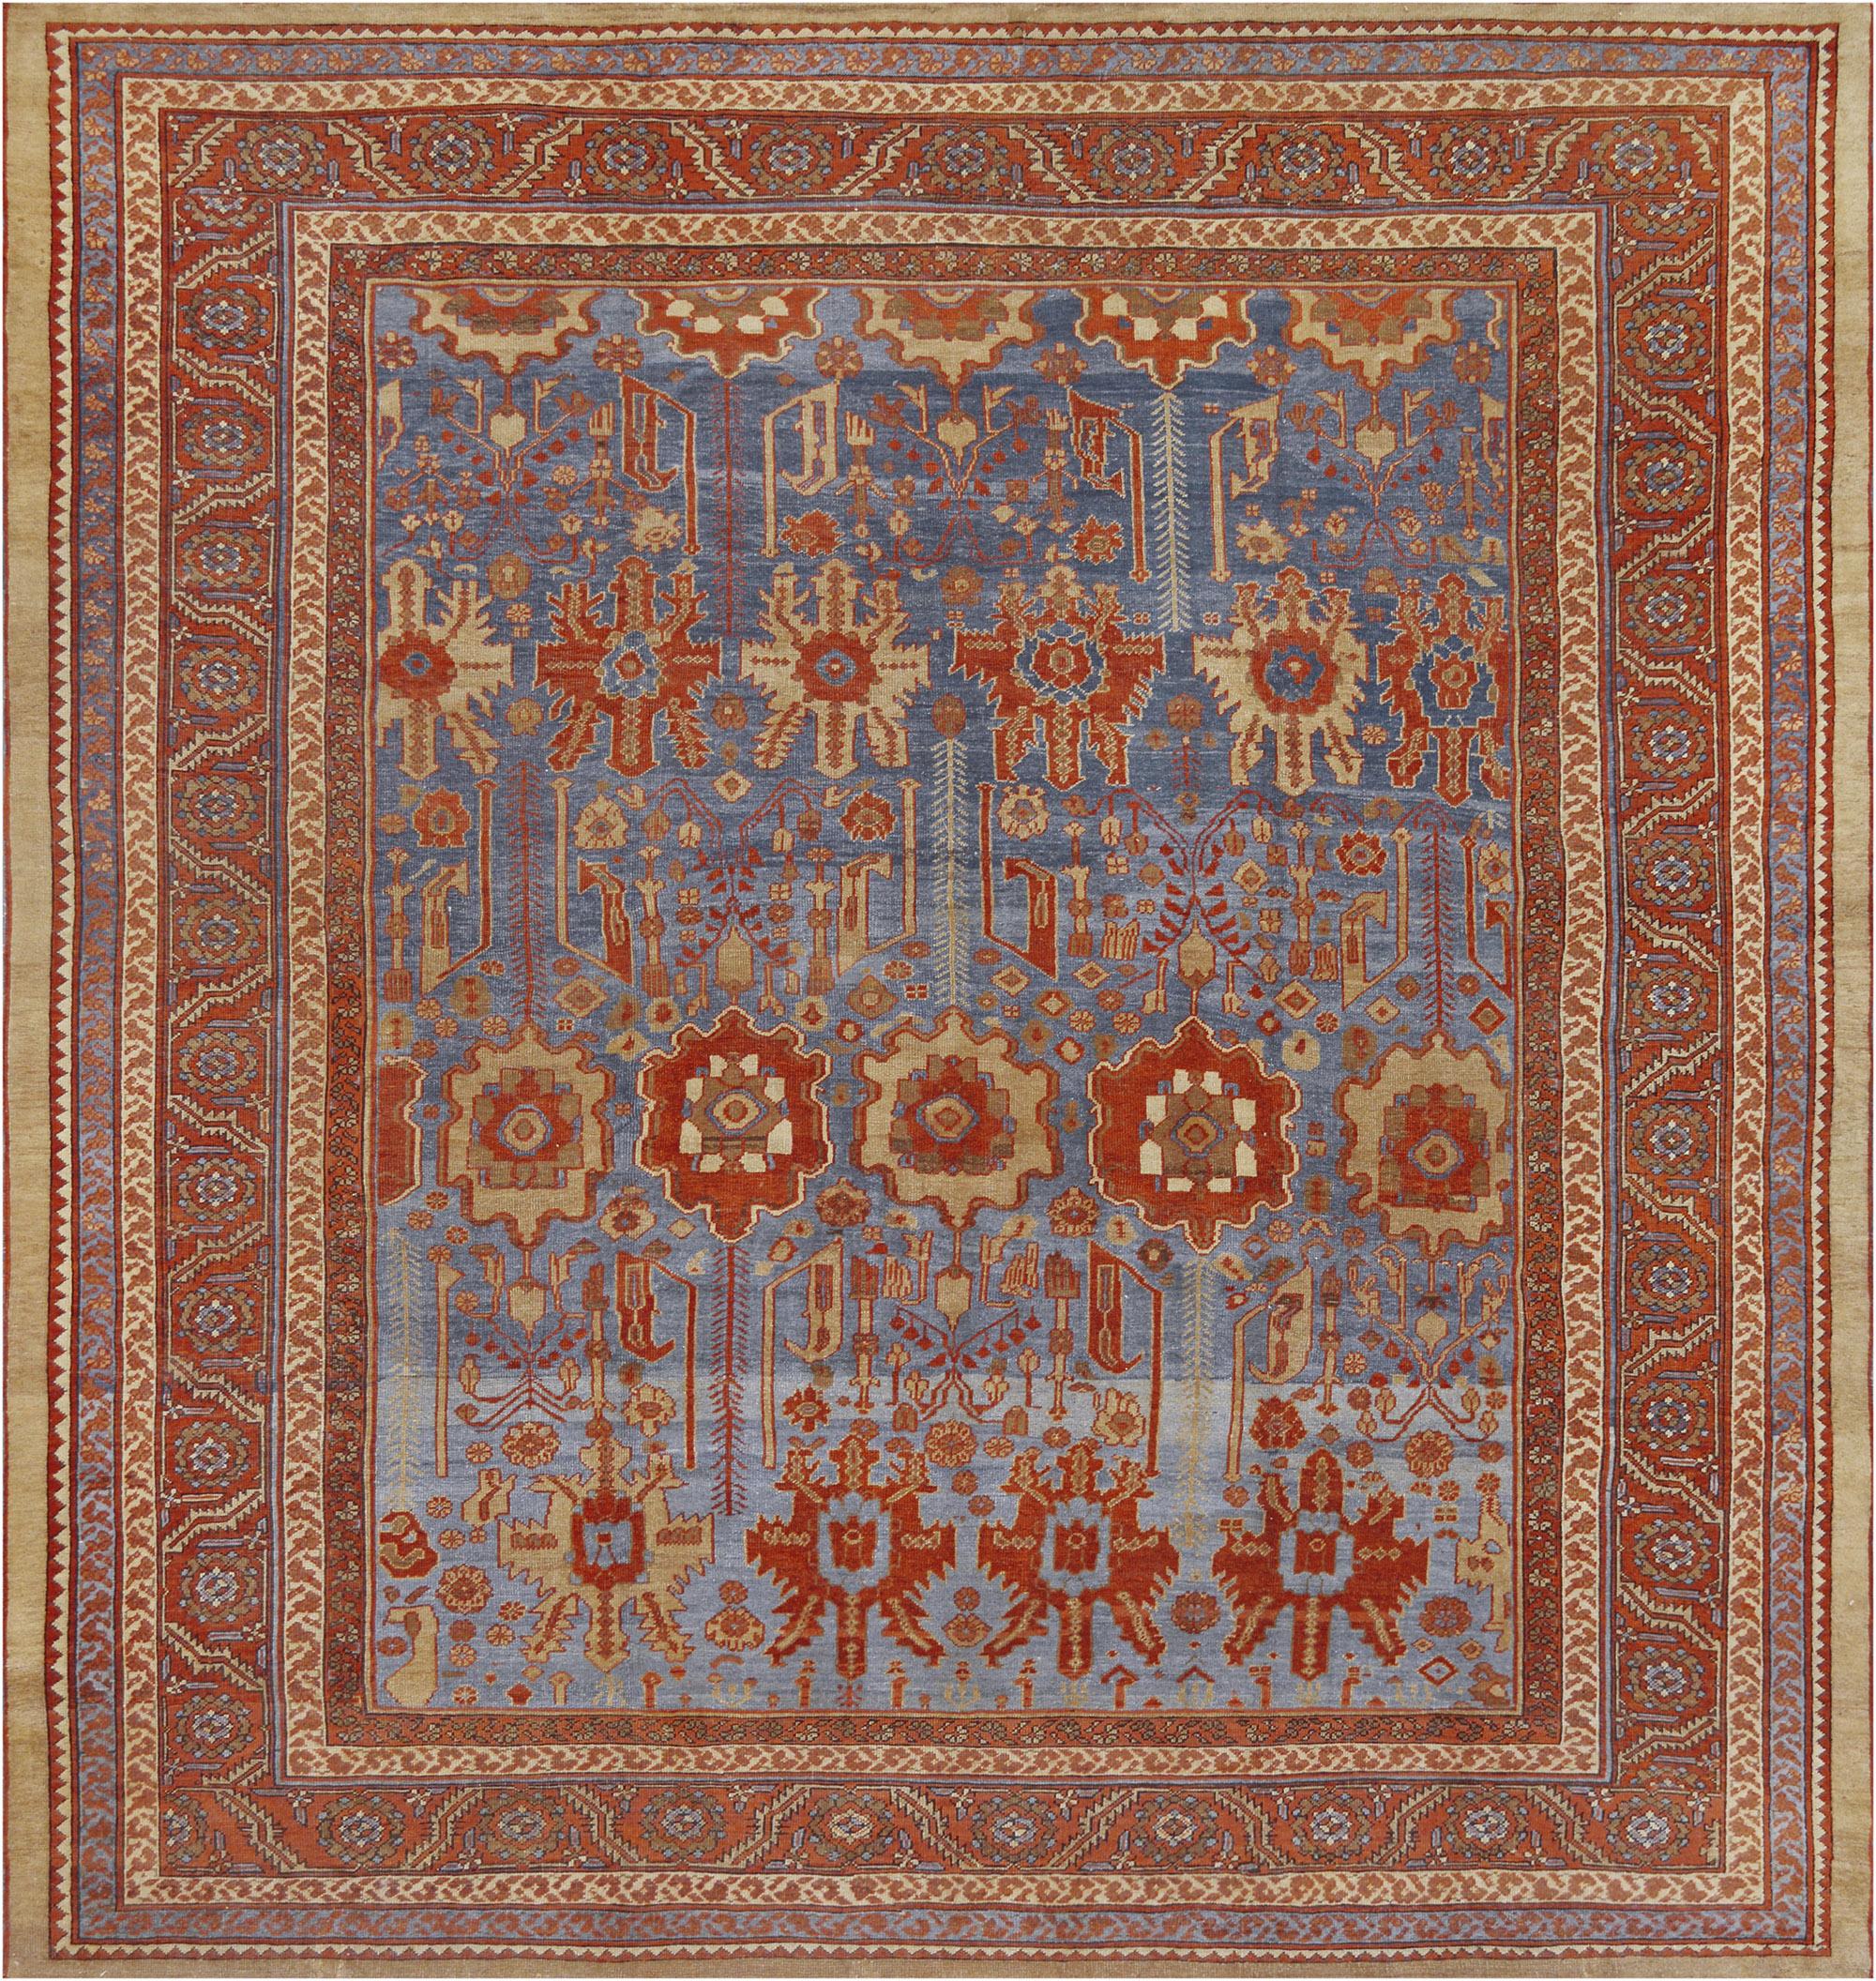 Bakshaish Hand-Woven Late 19th Century Wool Bakhshaish Rug from North West Persia For Sale